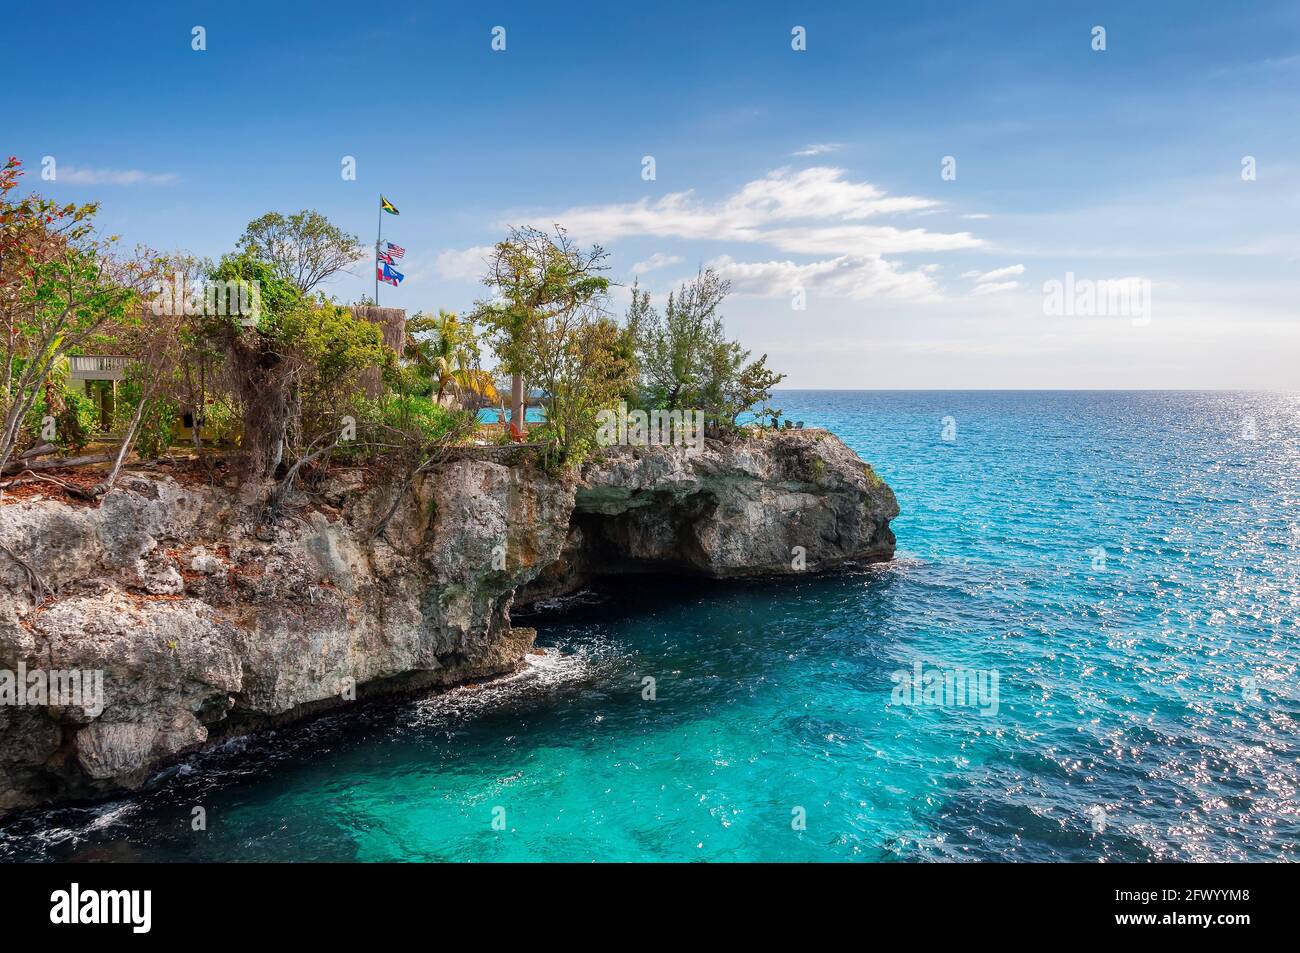 Caribbean beach with rocks and turquoise water in Negril, Jamaica Stock Photo